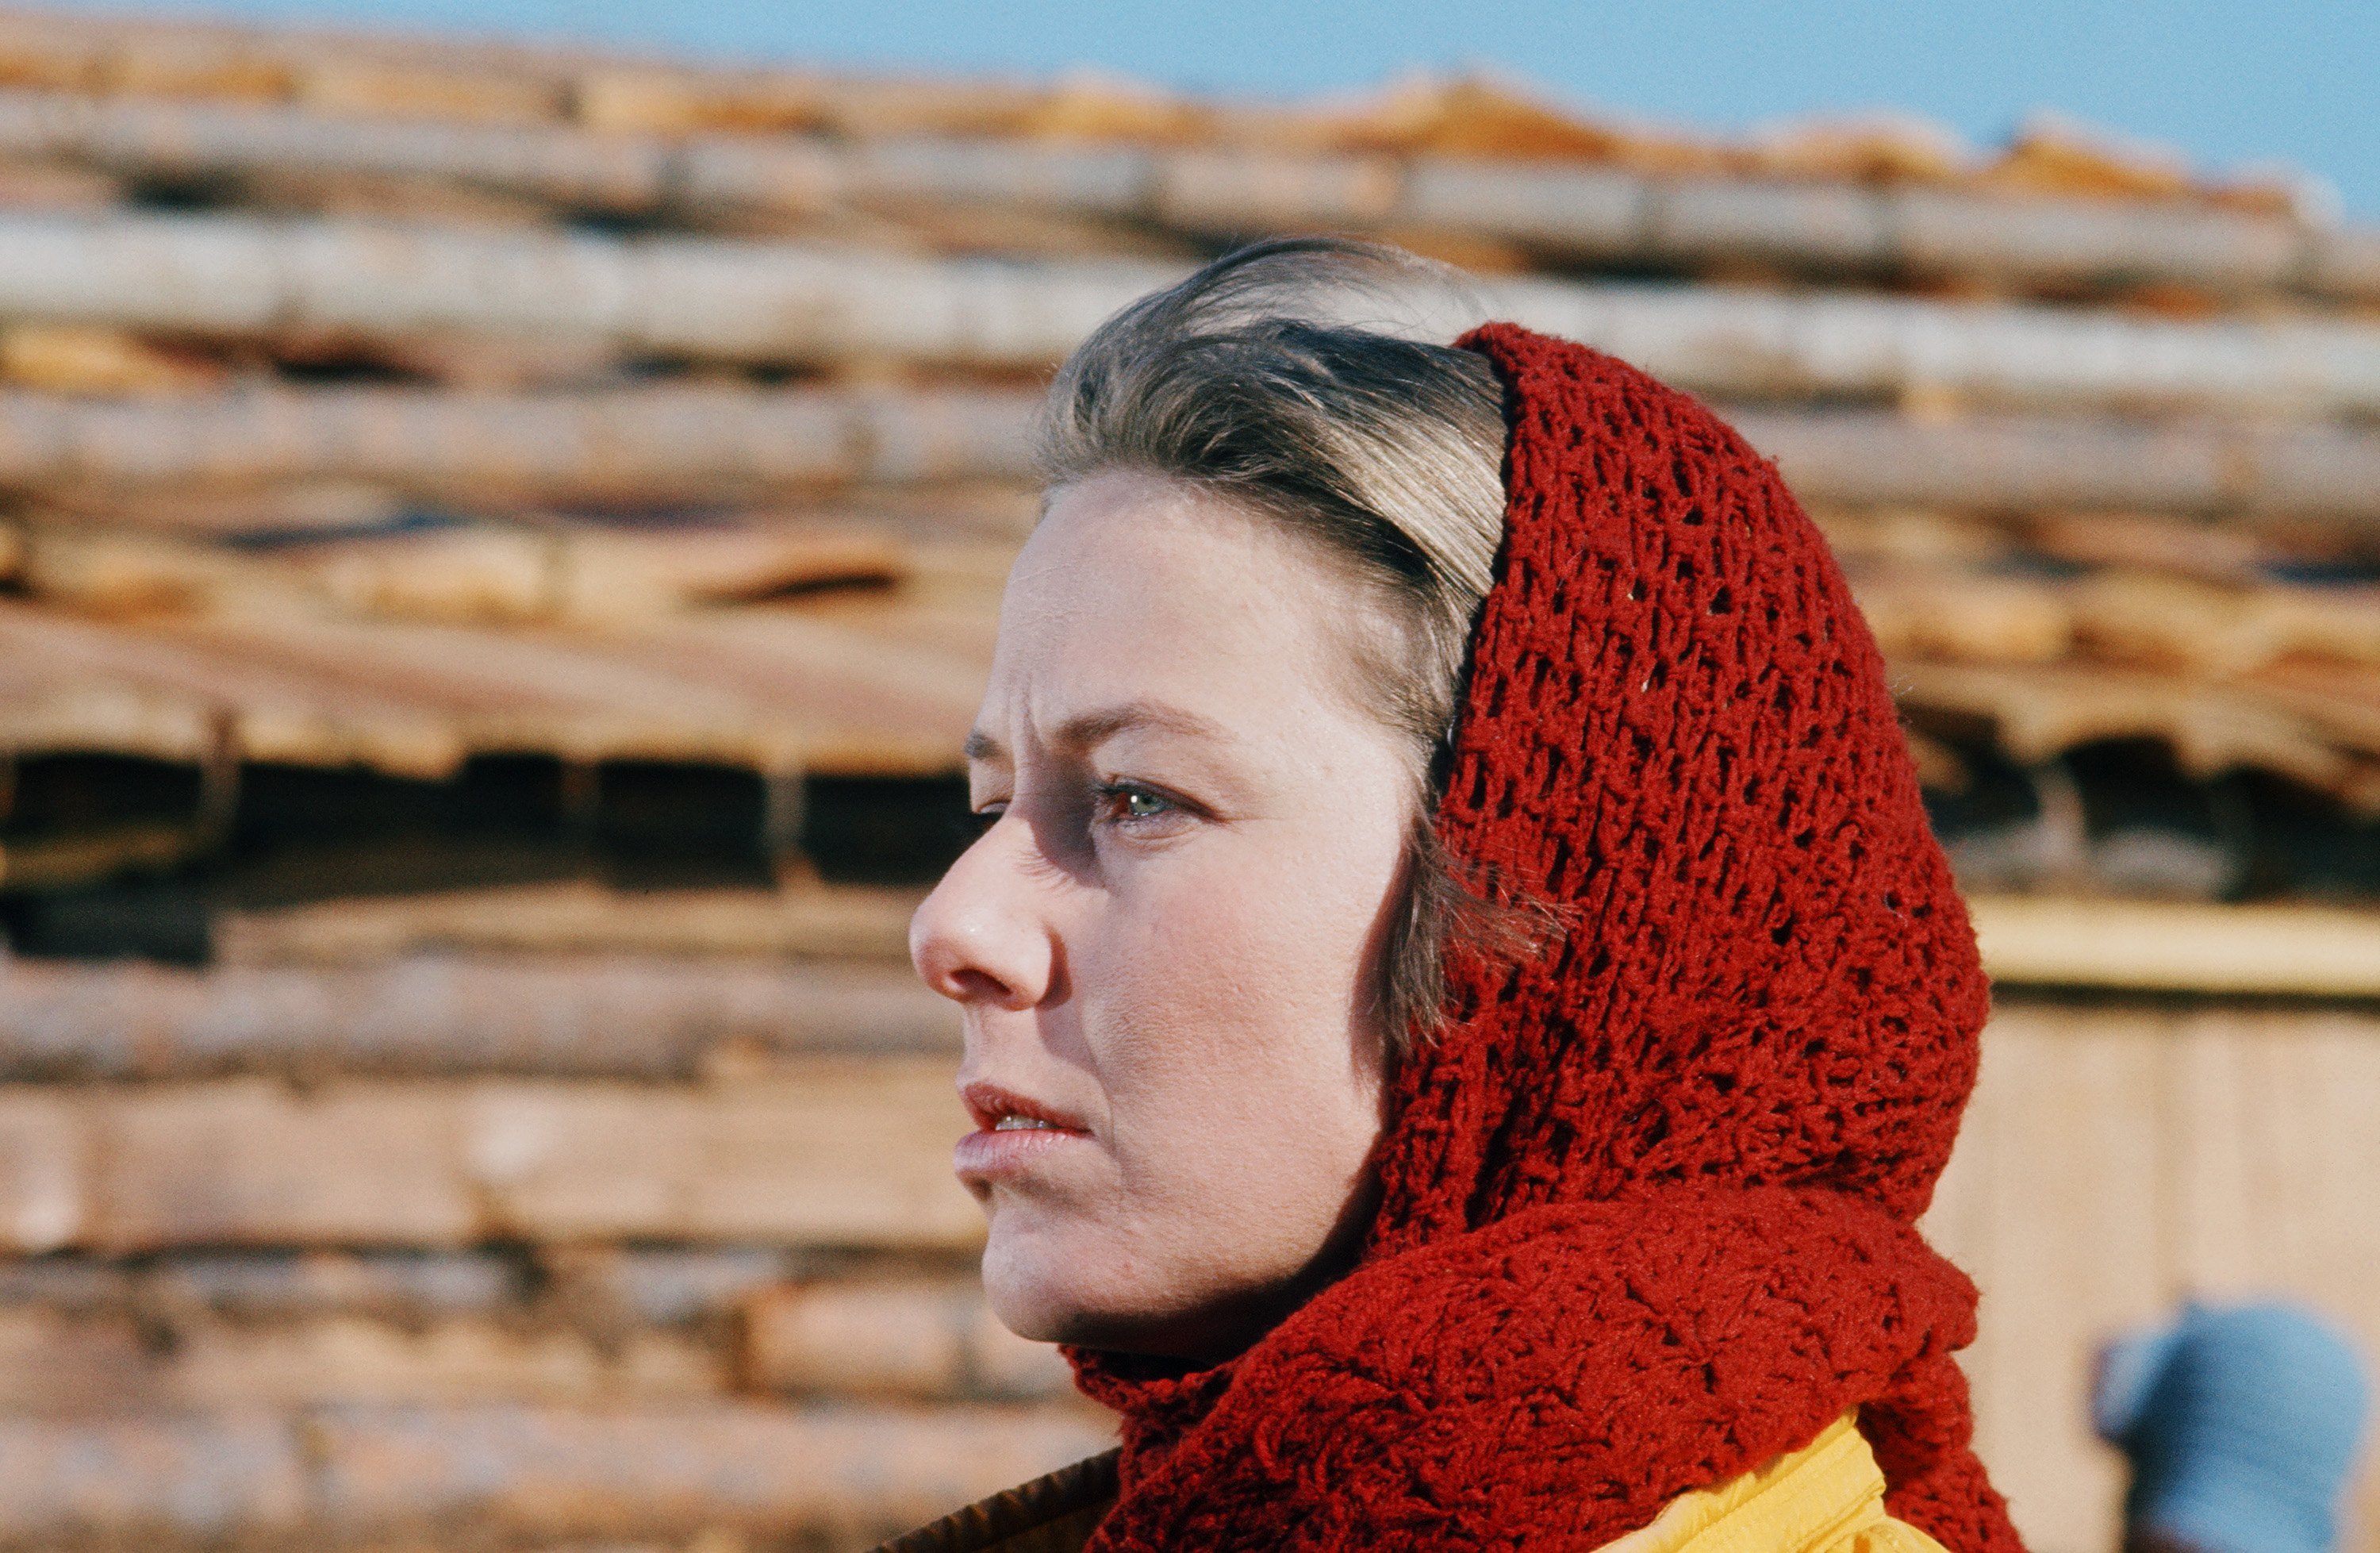 Karen Grassle stands on the set of 'Little House on the Prairie' with a red scarf around her head.